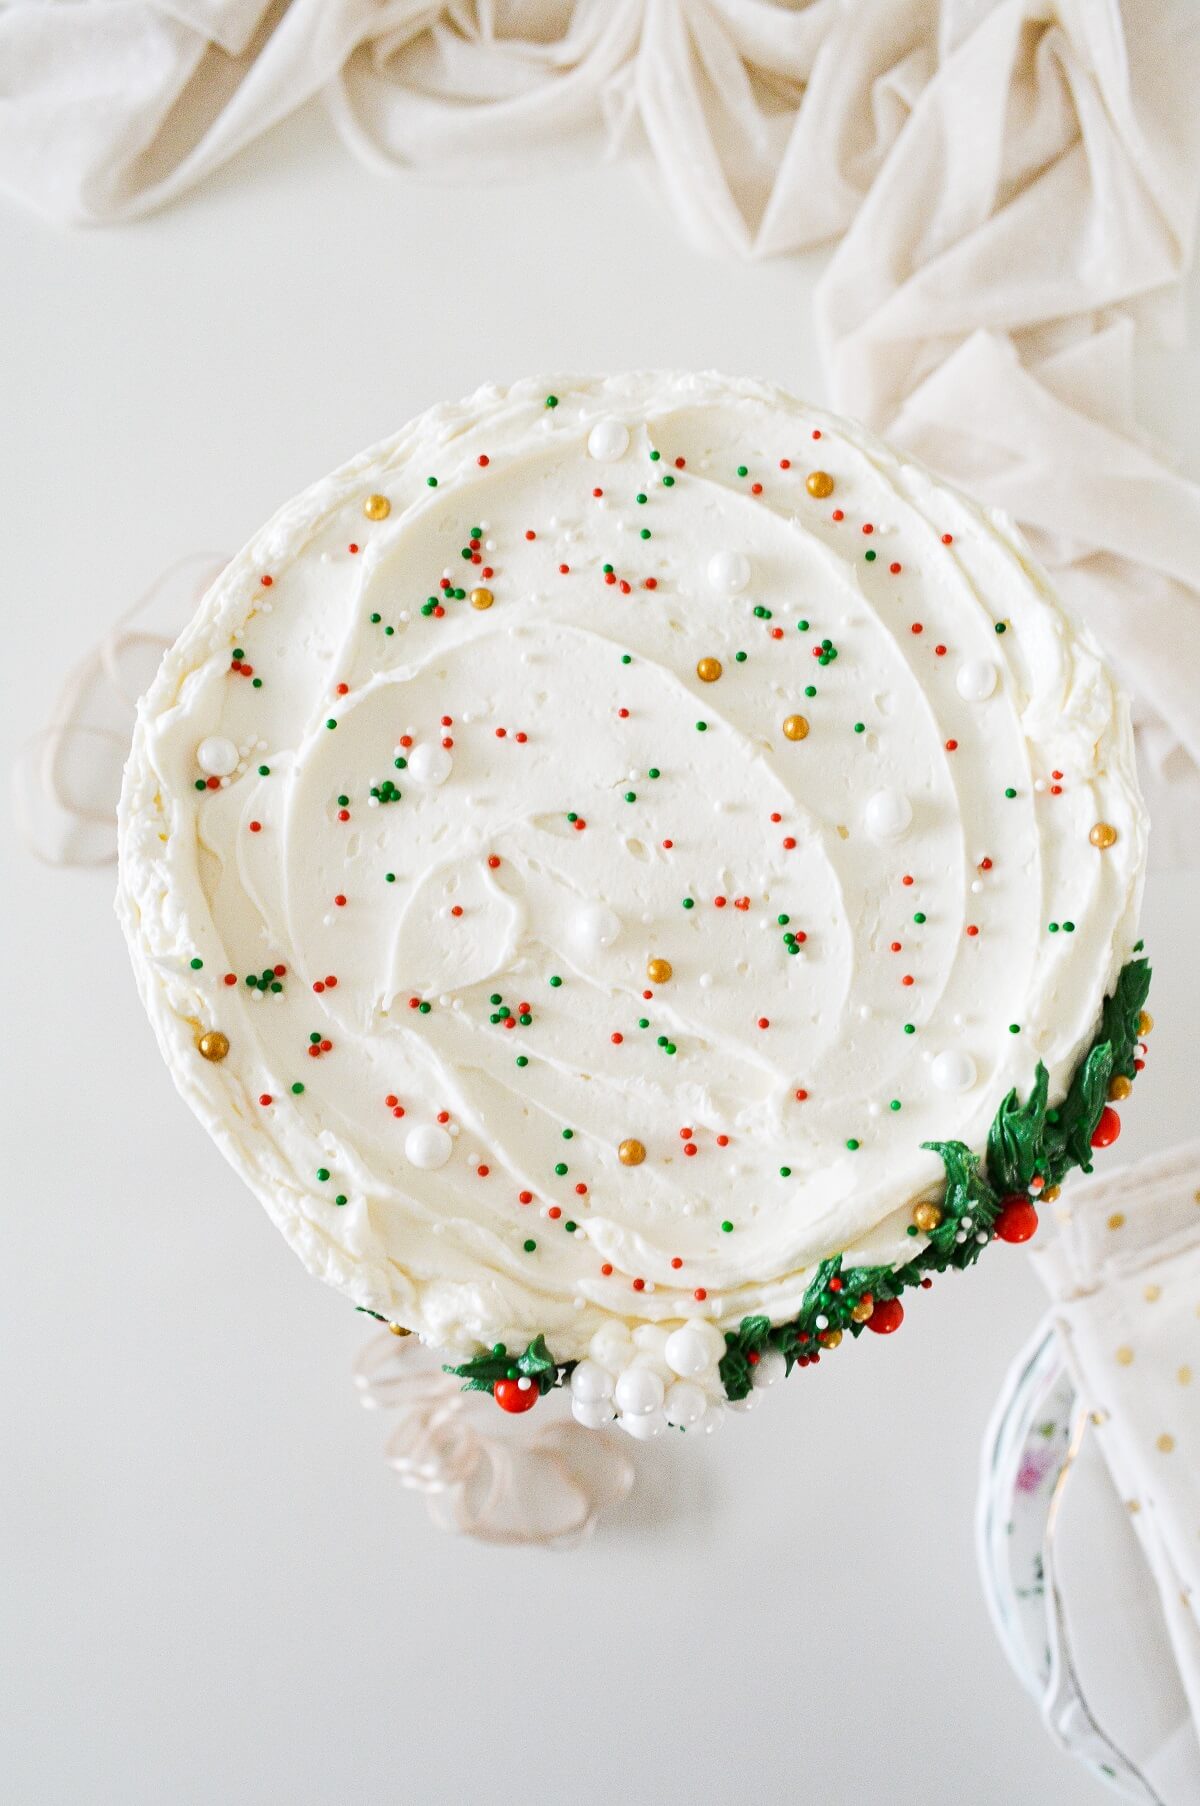 The top of a cake sprinkled with red, white, green, and gold sprinkles.